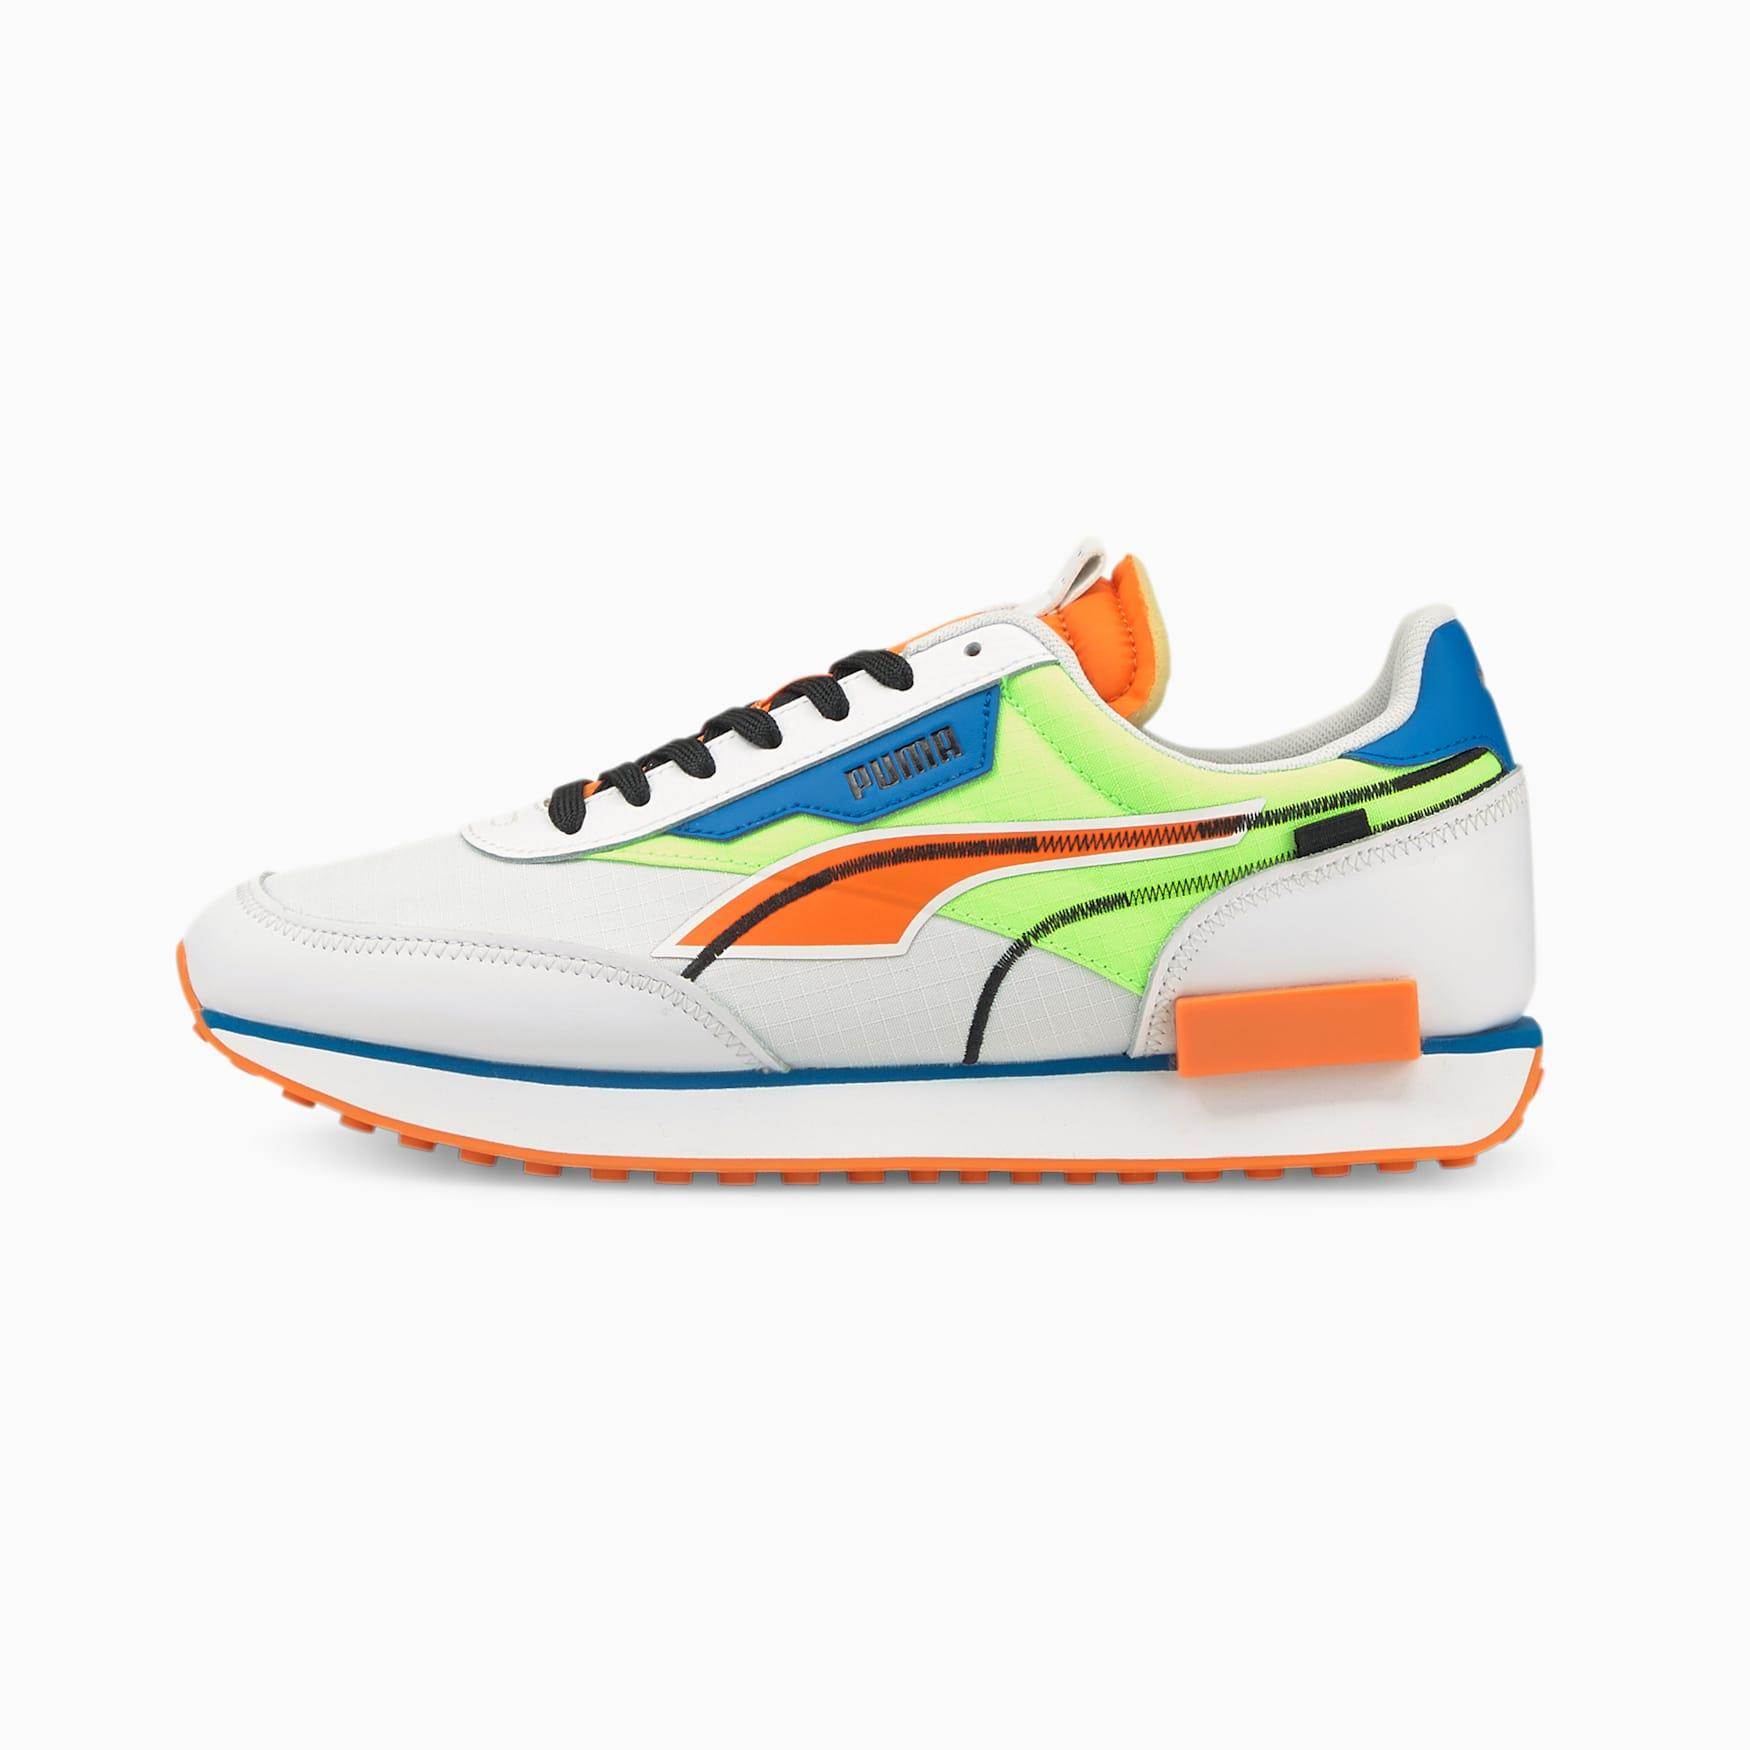 Puma Brand Men's Future Rider Twofold Laced Sports Shoes 380591 07 ...